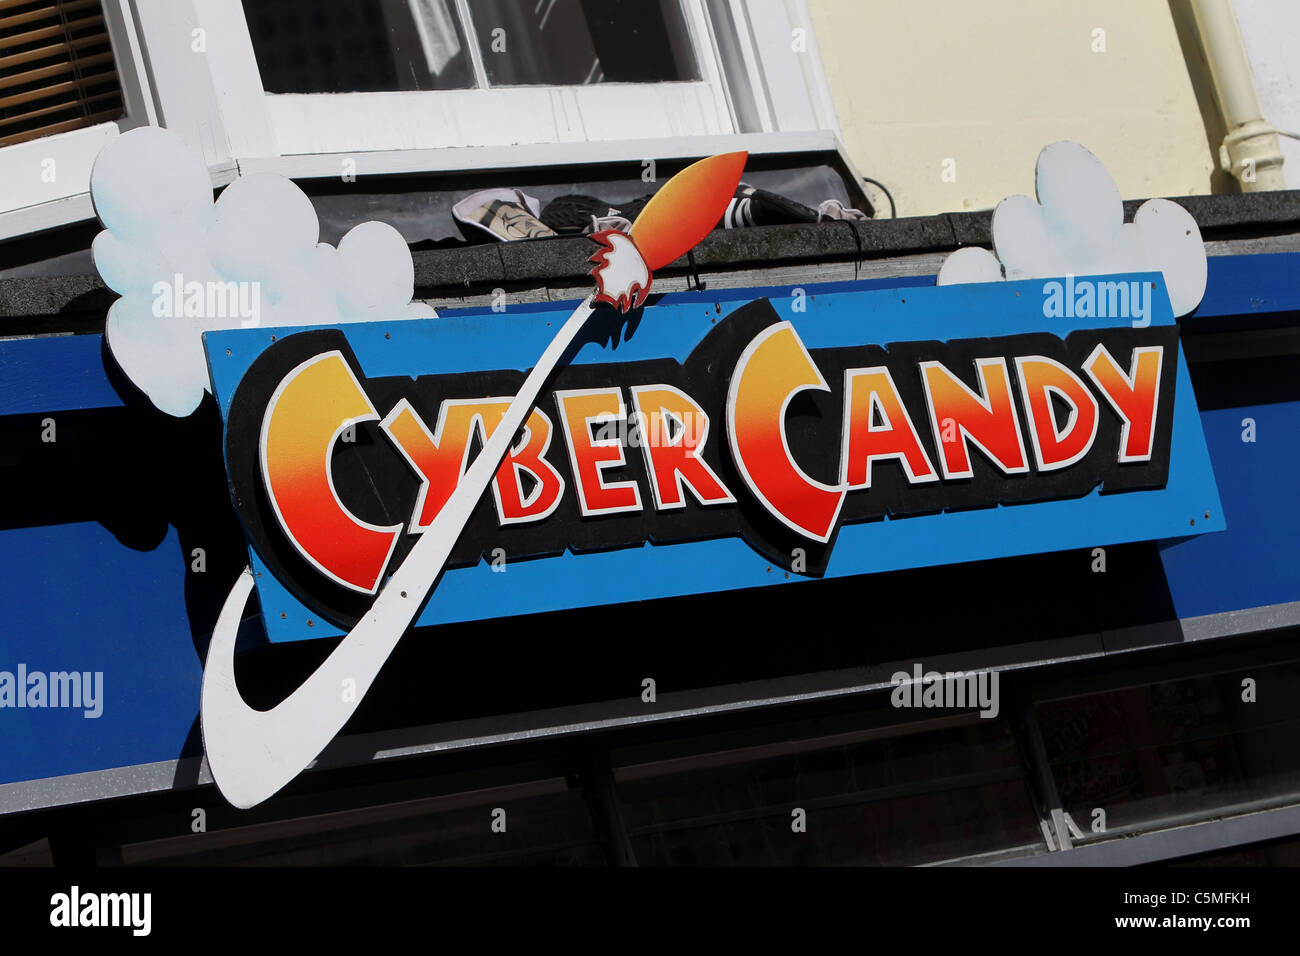 Cybercandy sweet shop sign in Brighton, East Sussex, UK. Stock Photo